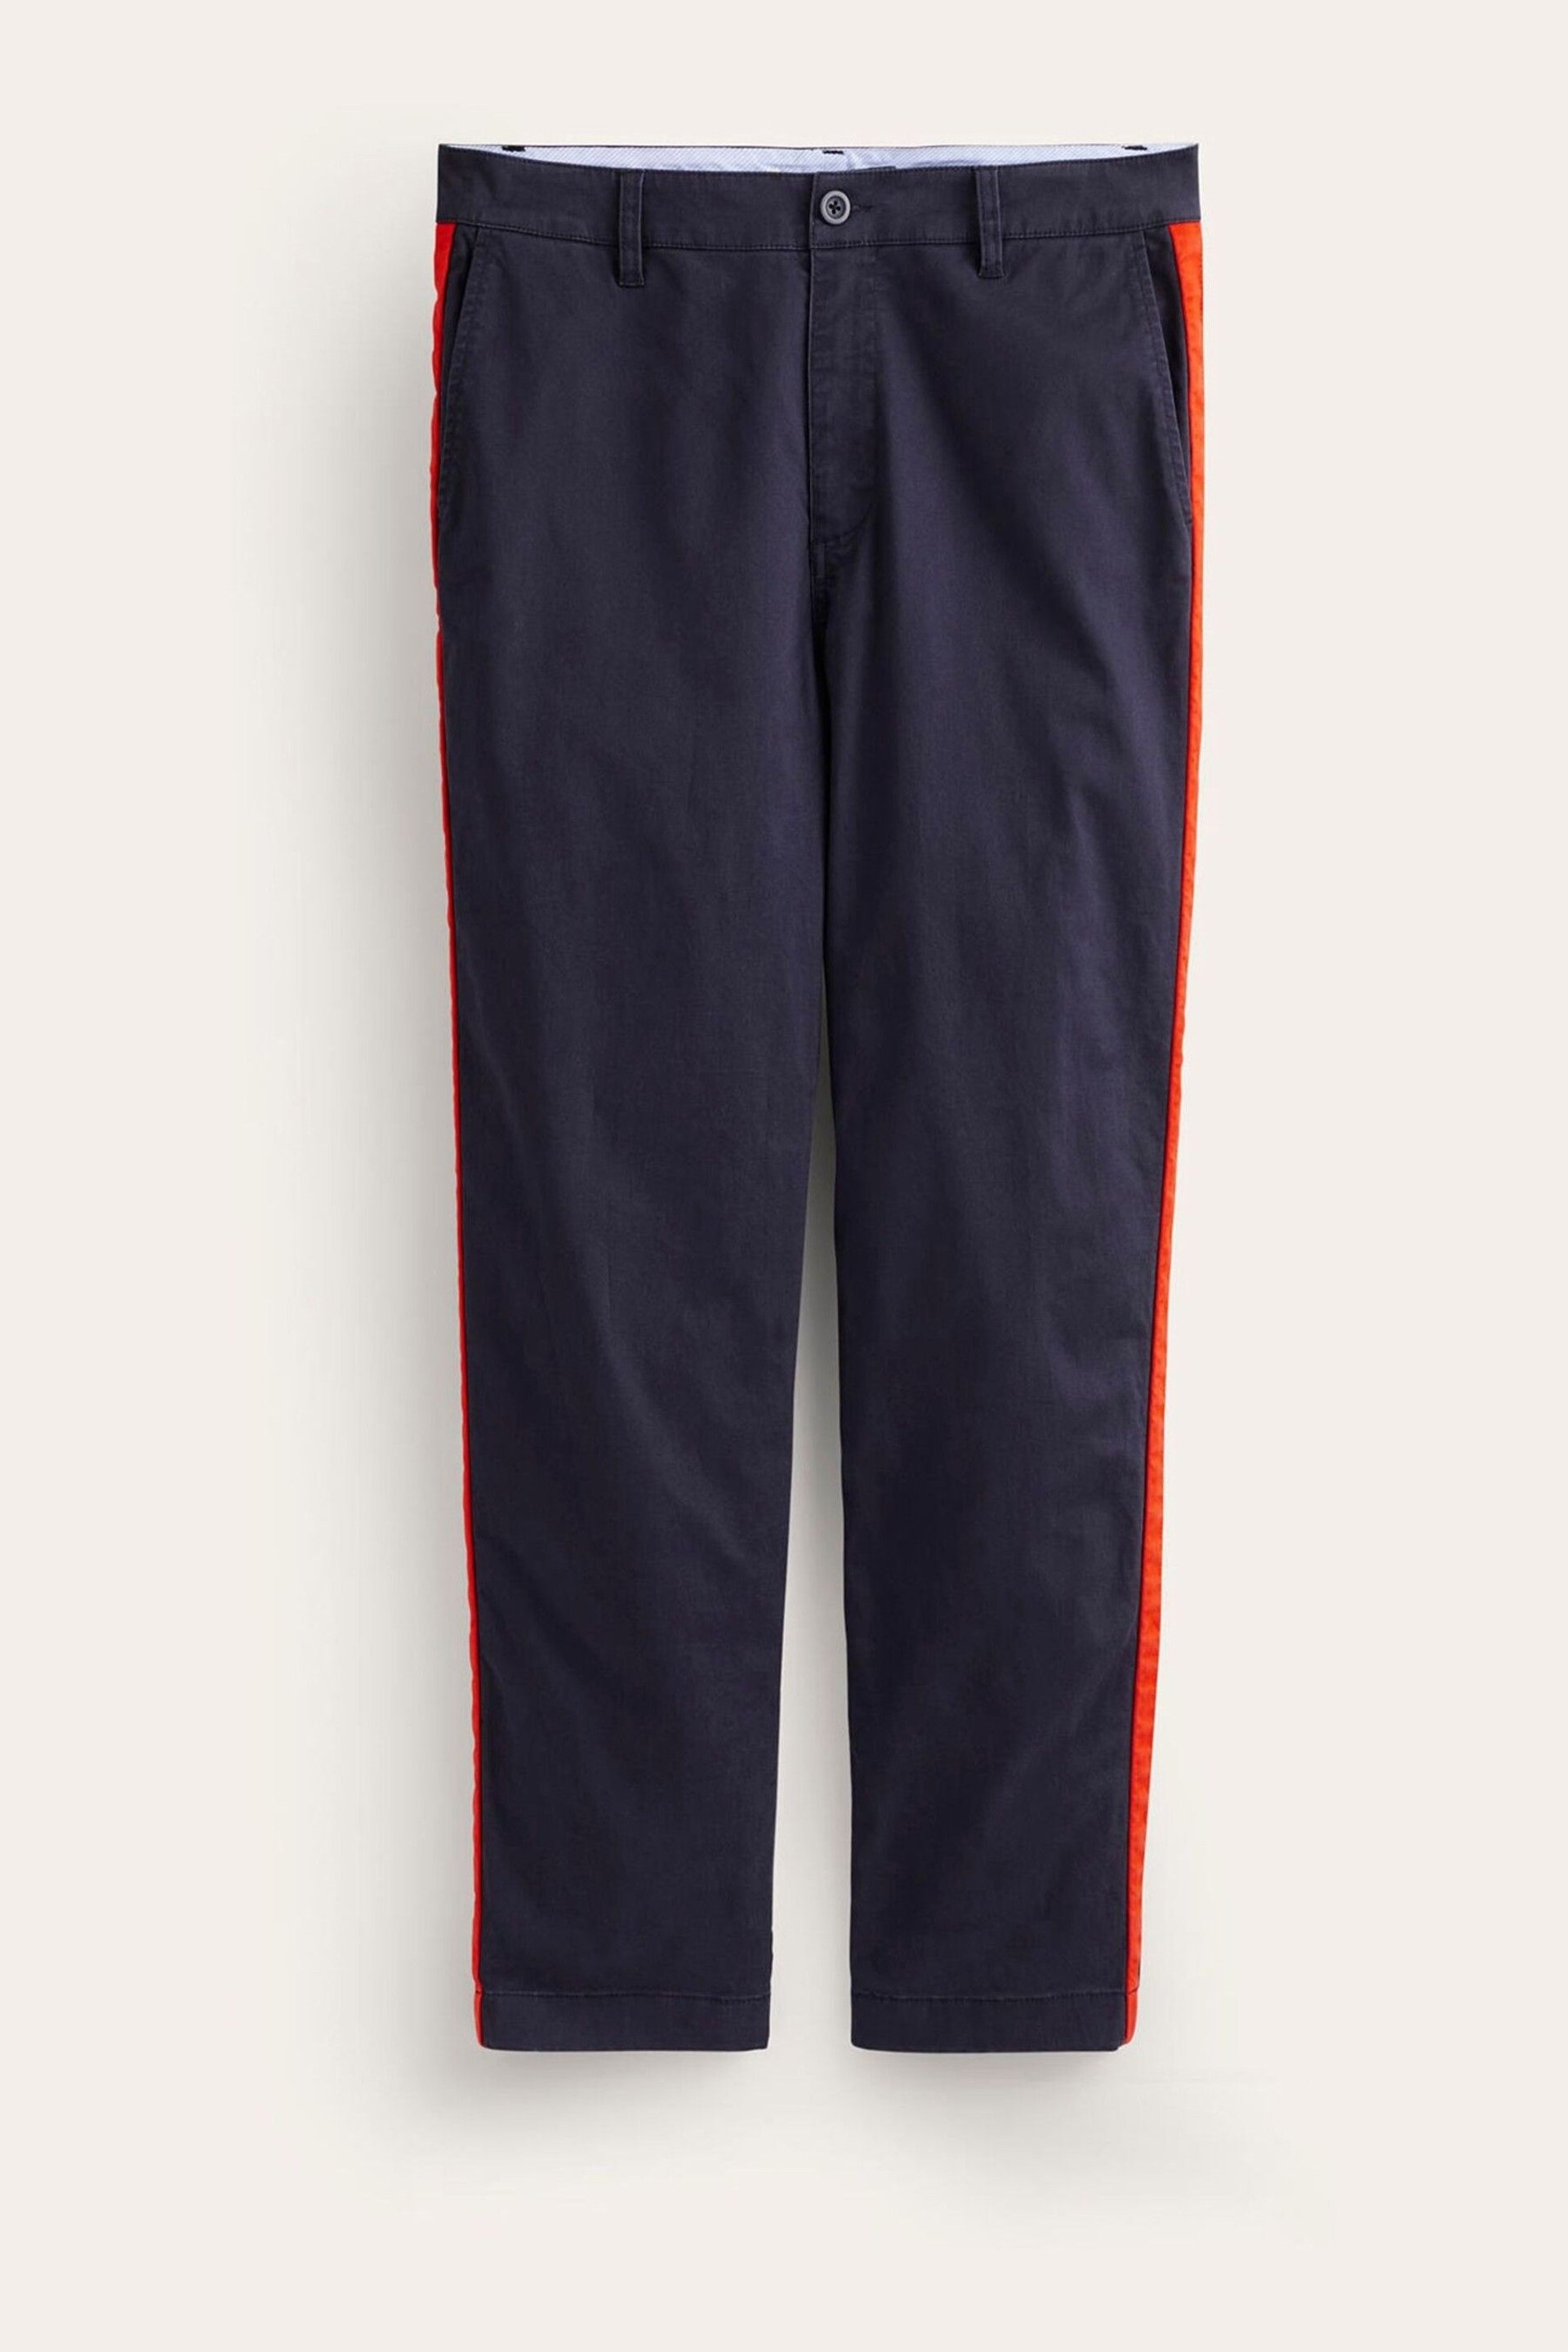 Boden Blue Petite Barnsbury Chinos Trousers - Image 5 of 5